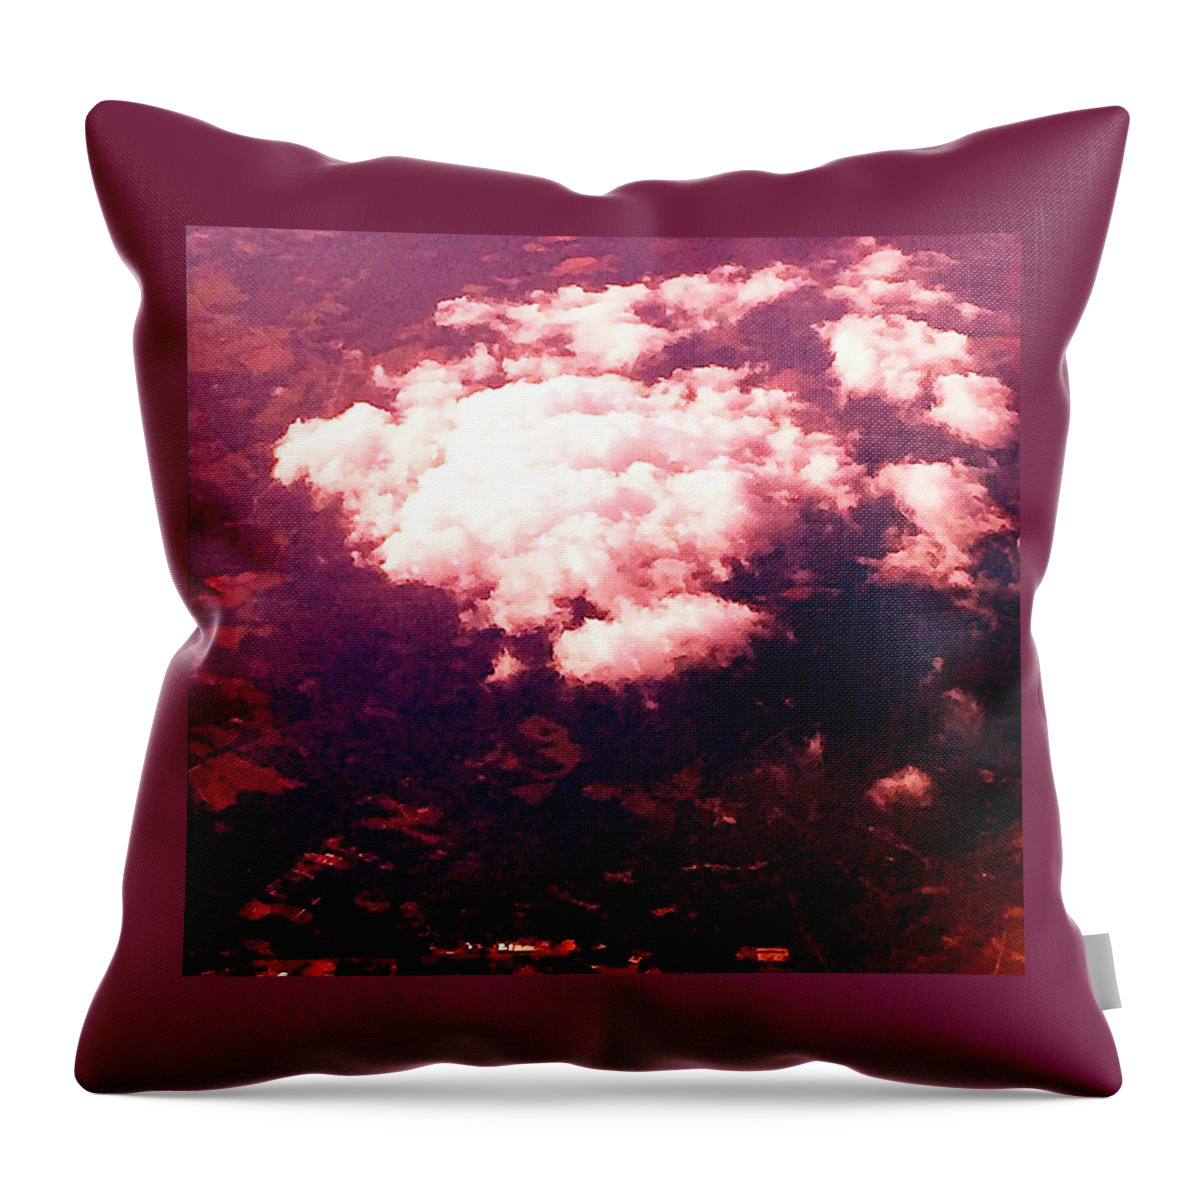  Throw Pillow featuring the photograph Stormy eyeee by Trevor A Smith